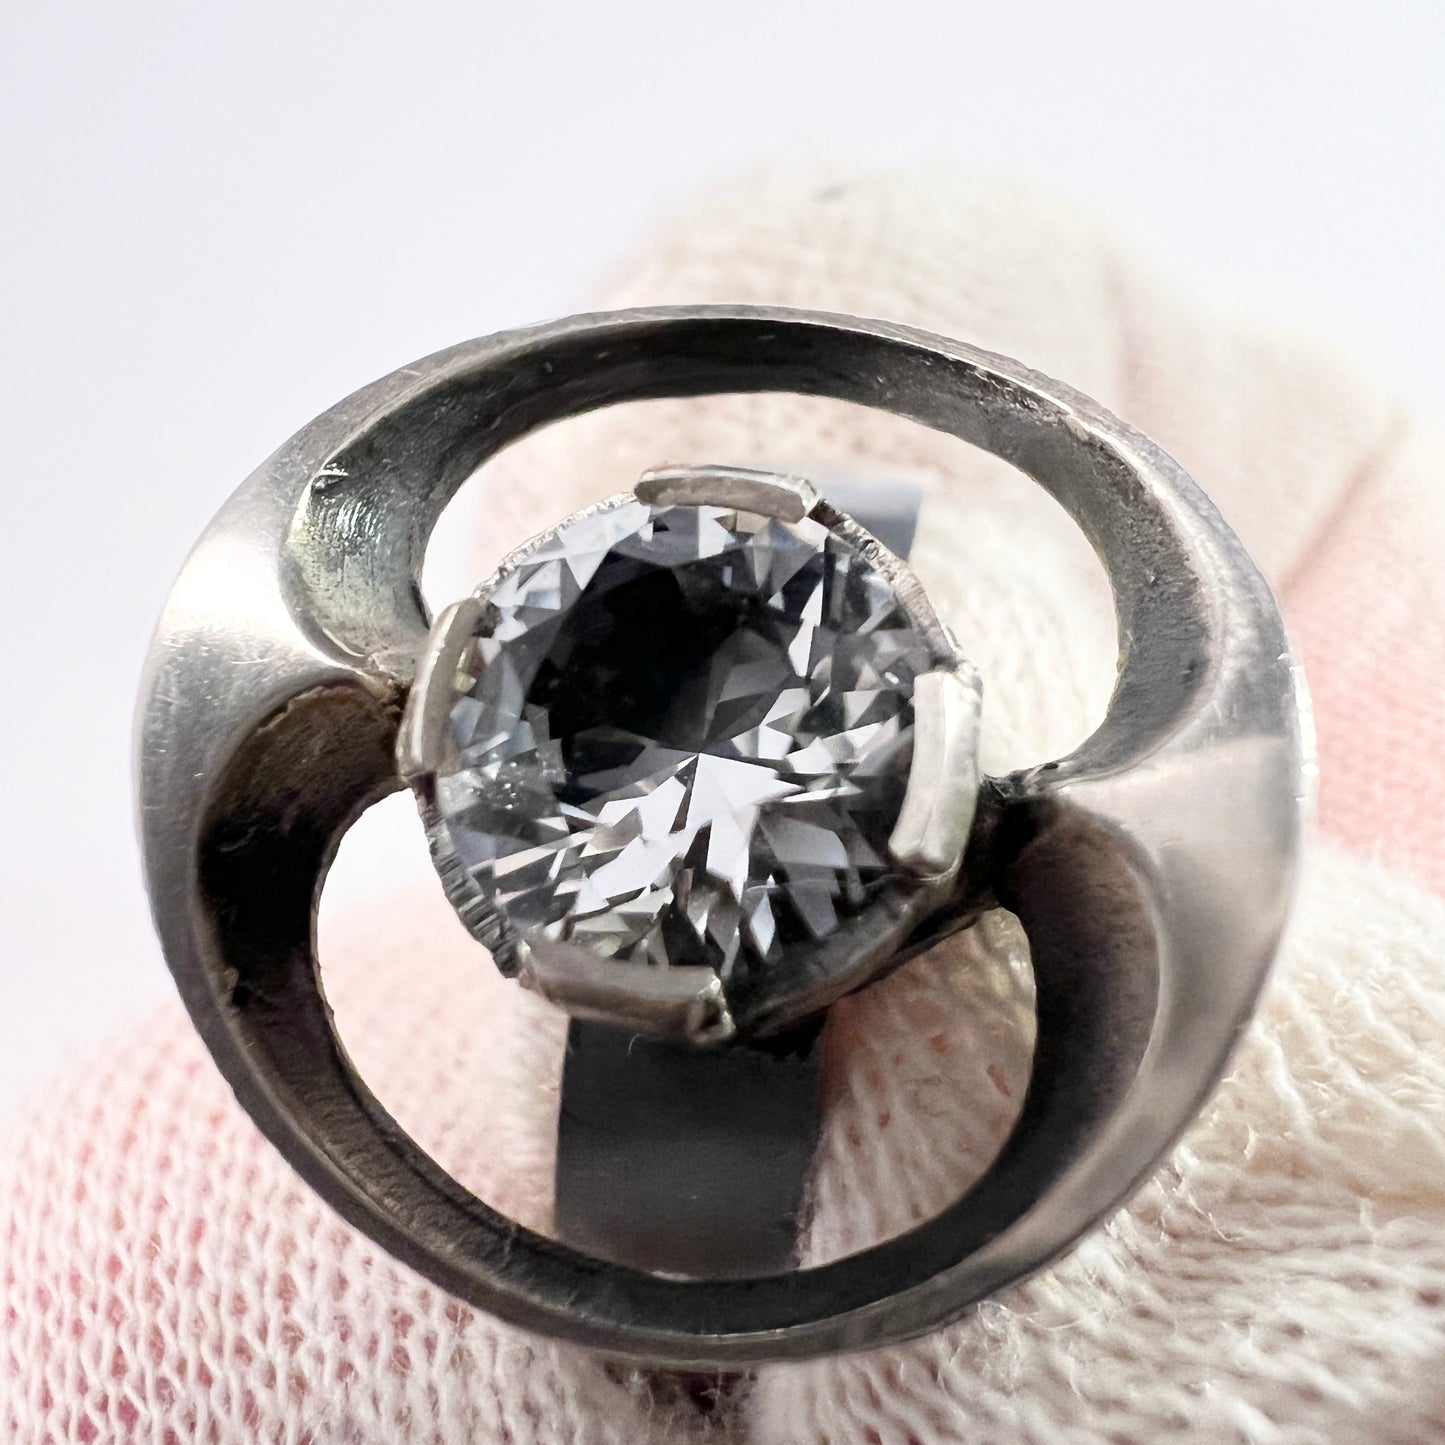 Karl Laine for Sten & Laine Finland 1976. Sterling Silver Rock Crystal Ring.